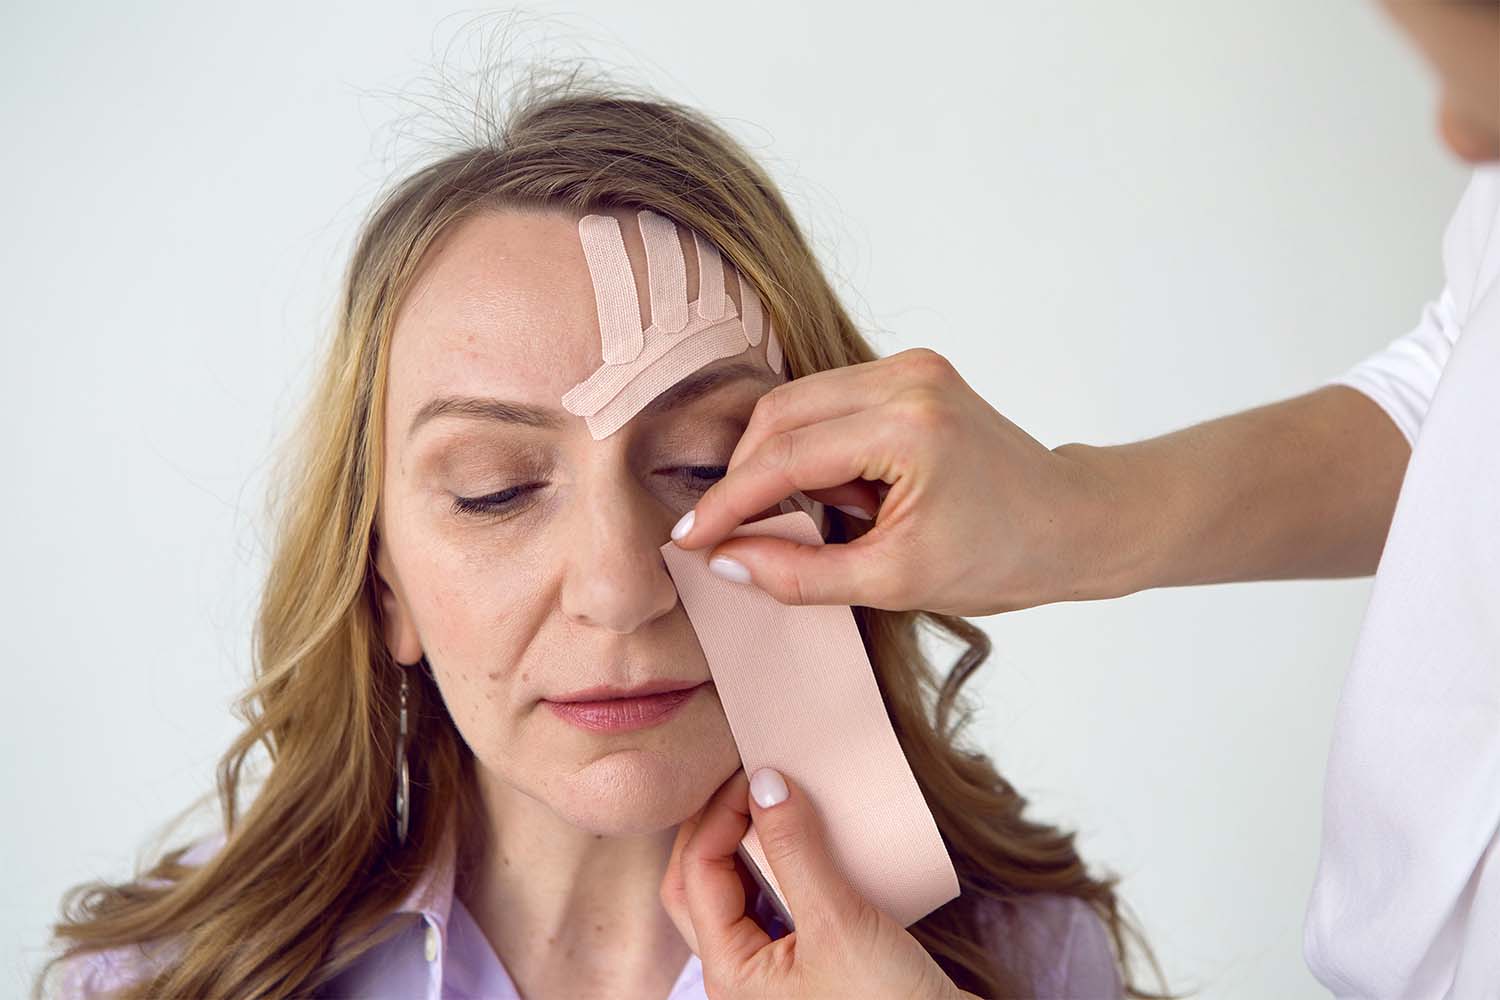 Facelift Tape: What Is It & How Is It Used?